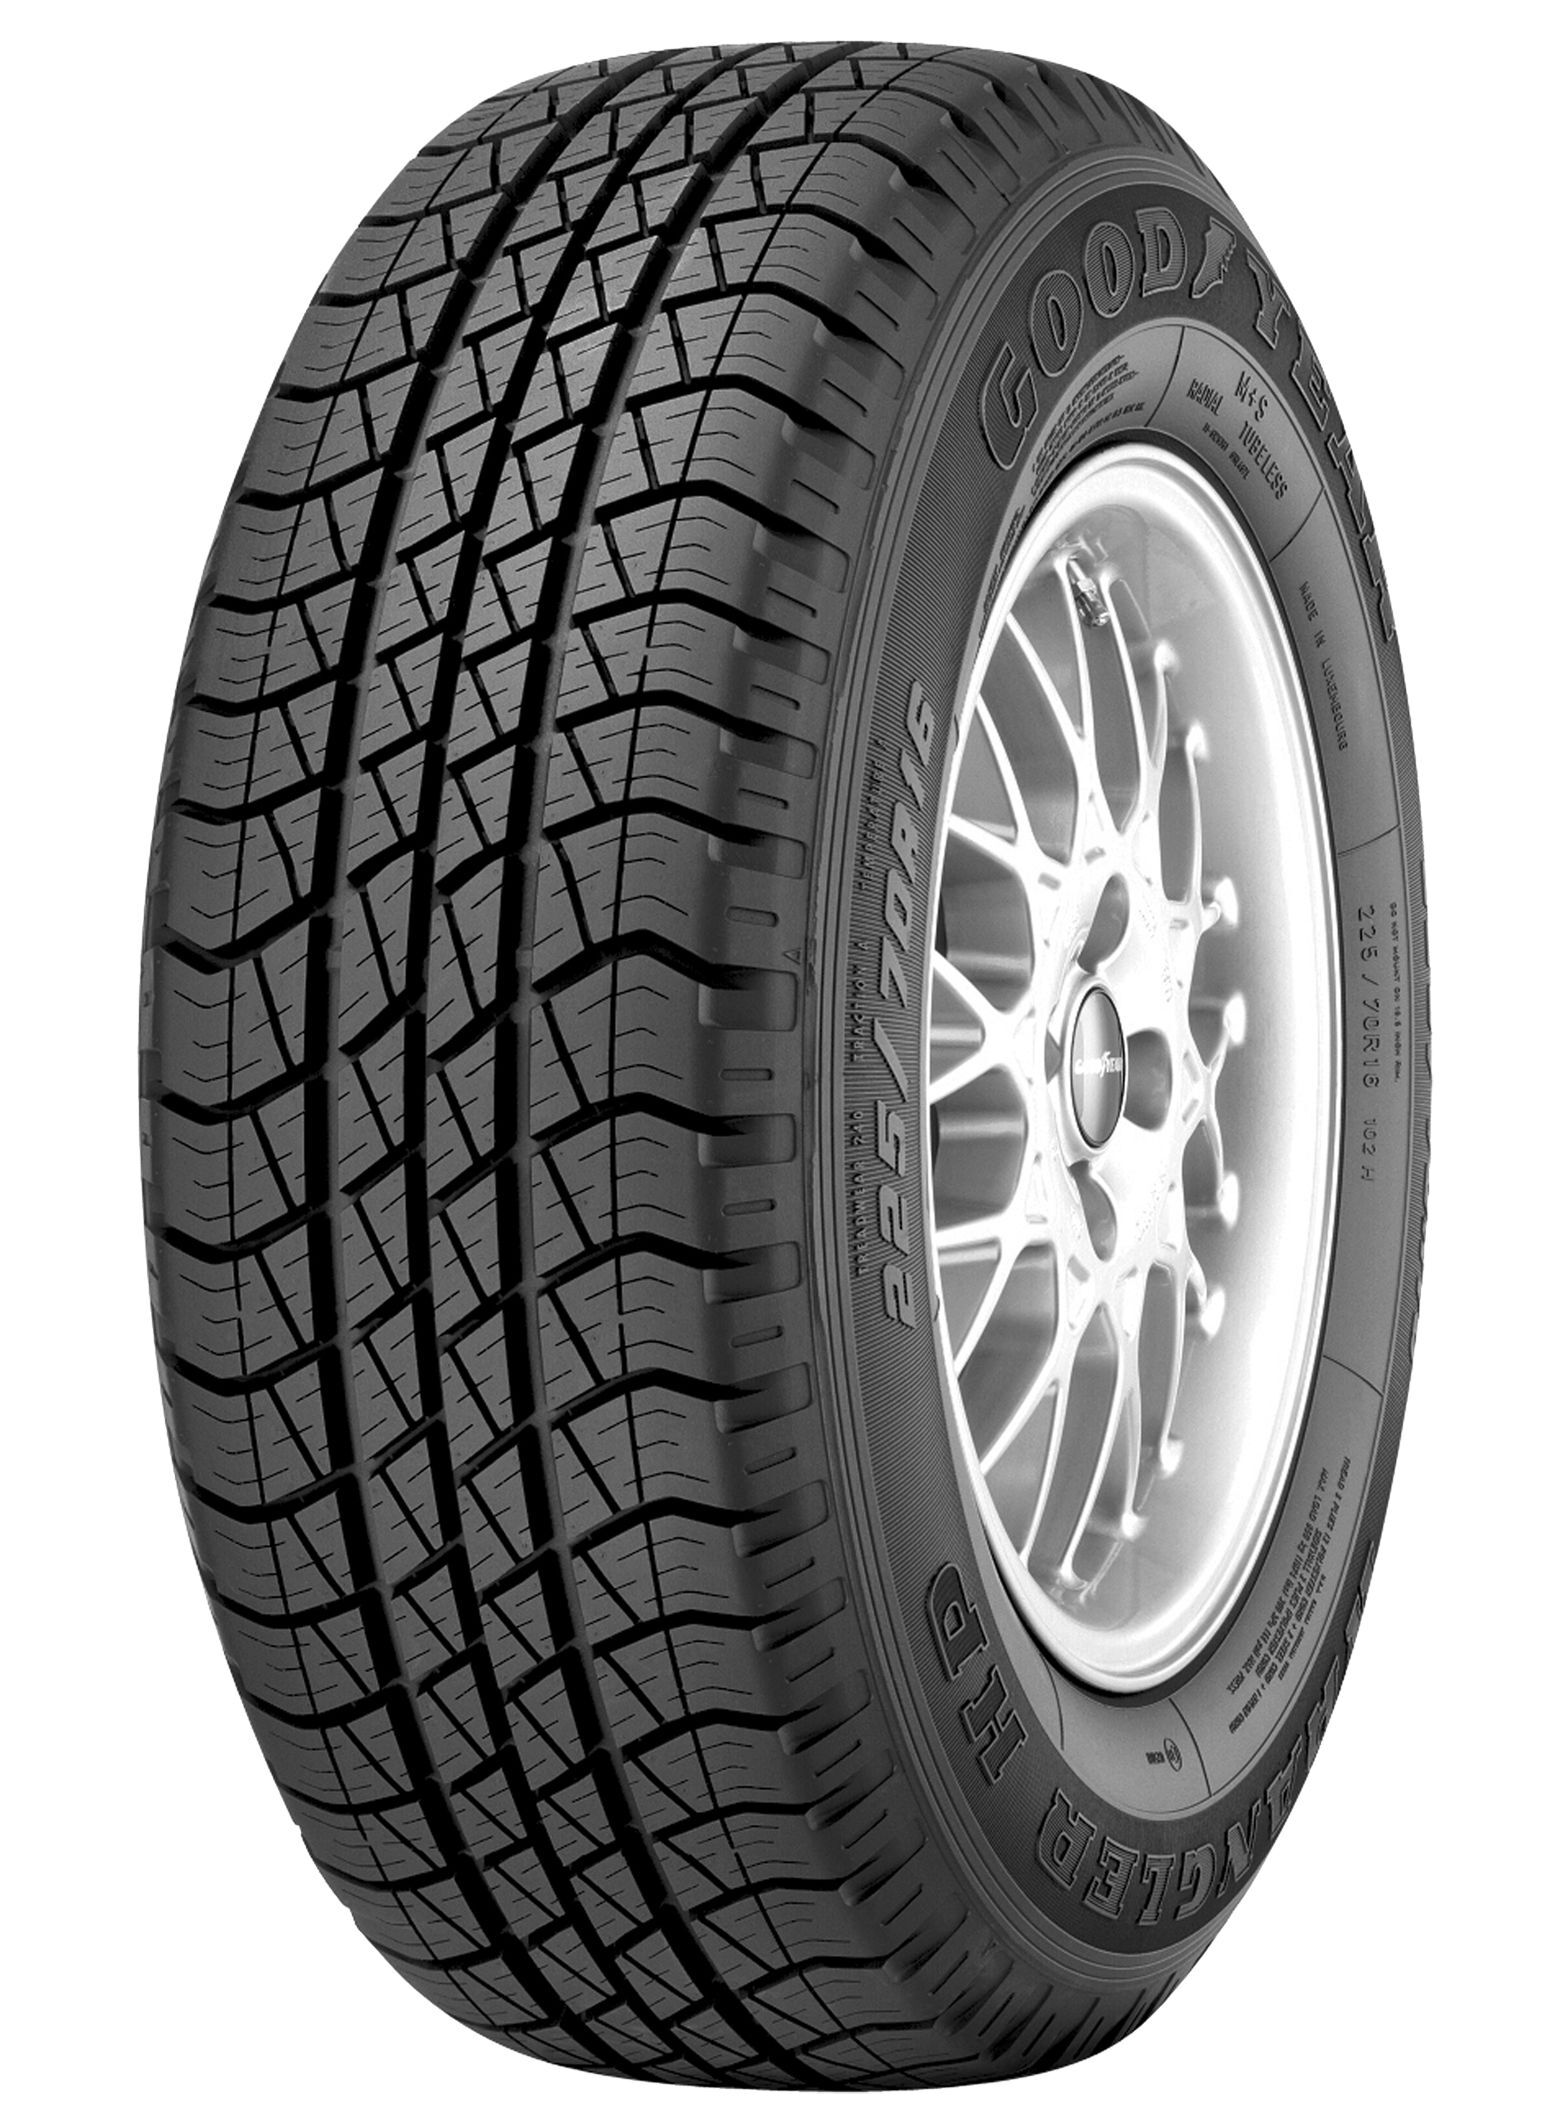 Goodyear Pneumatico Wrangler HP All Weather 275/65 R 17 115 H